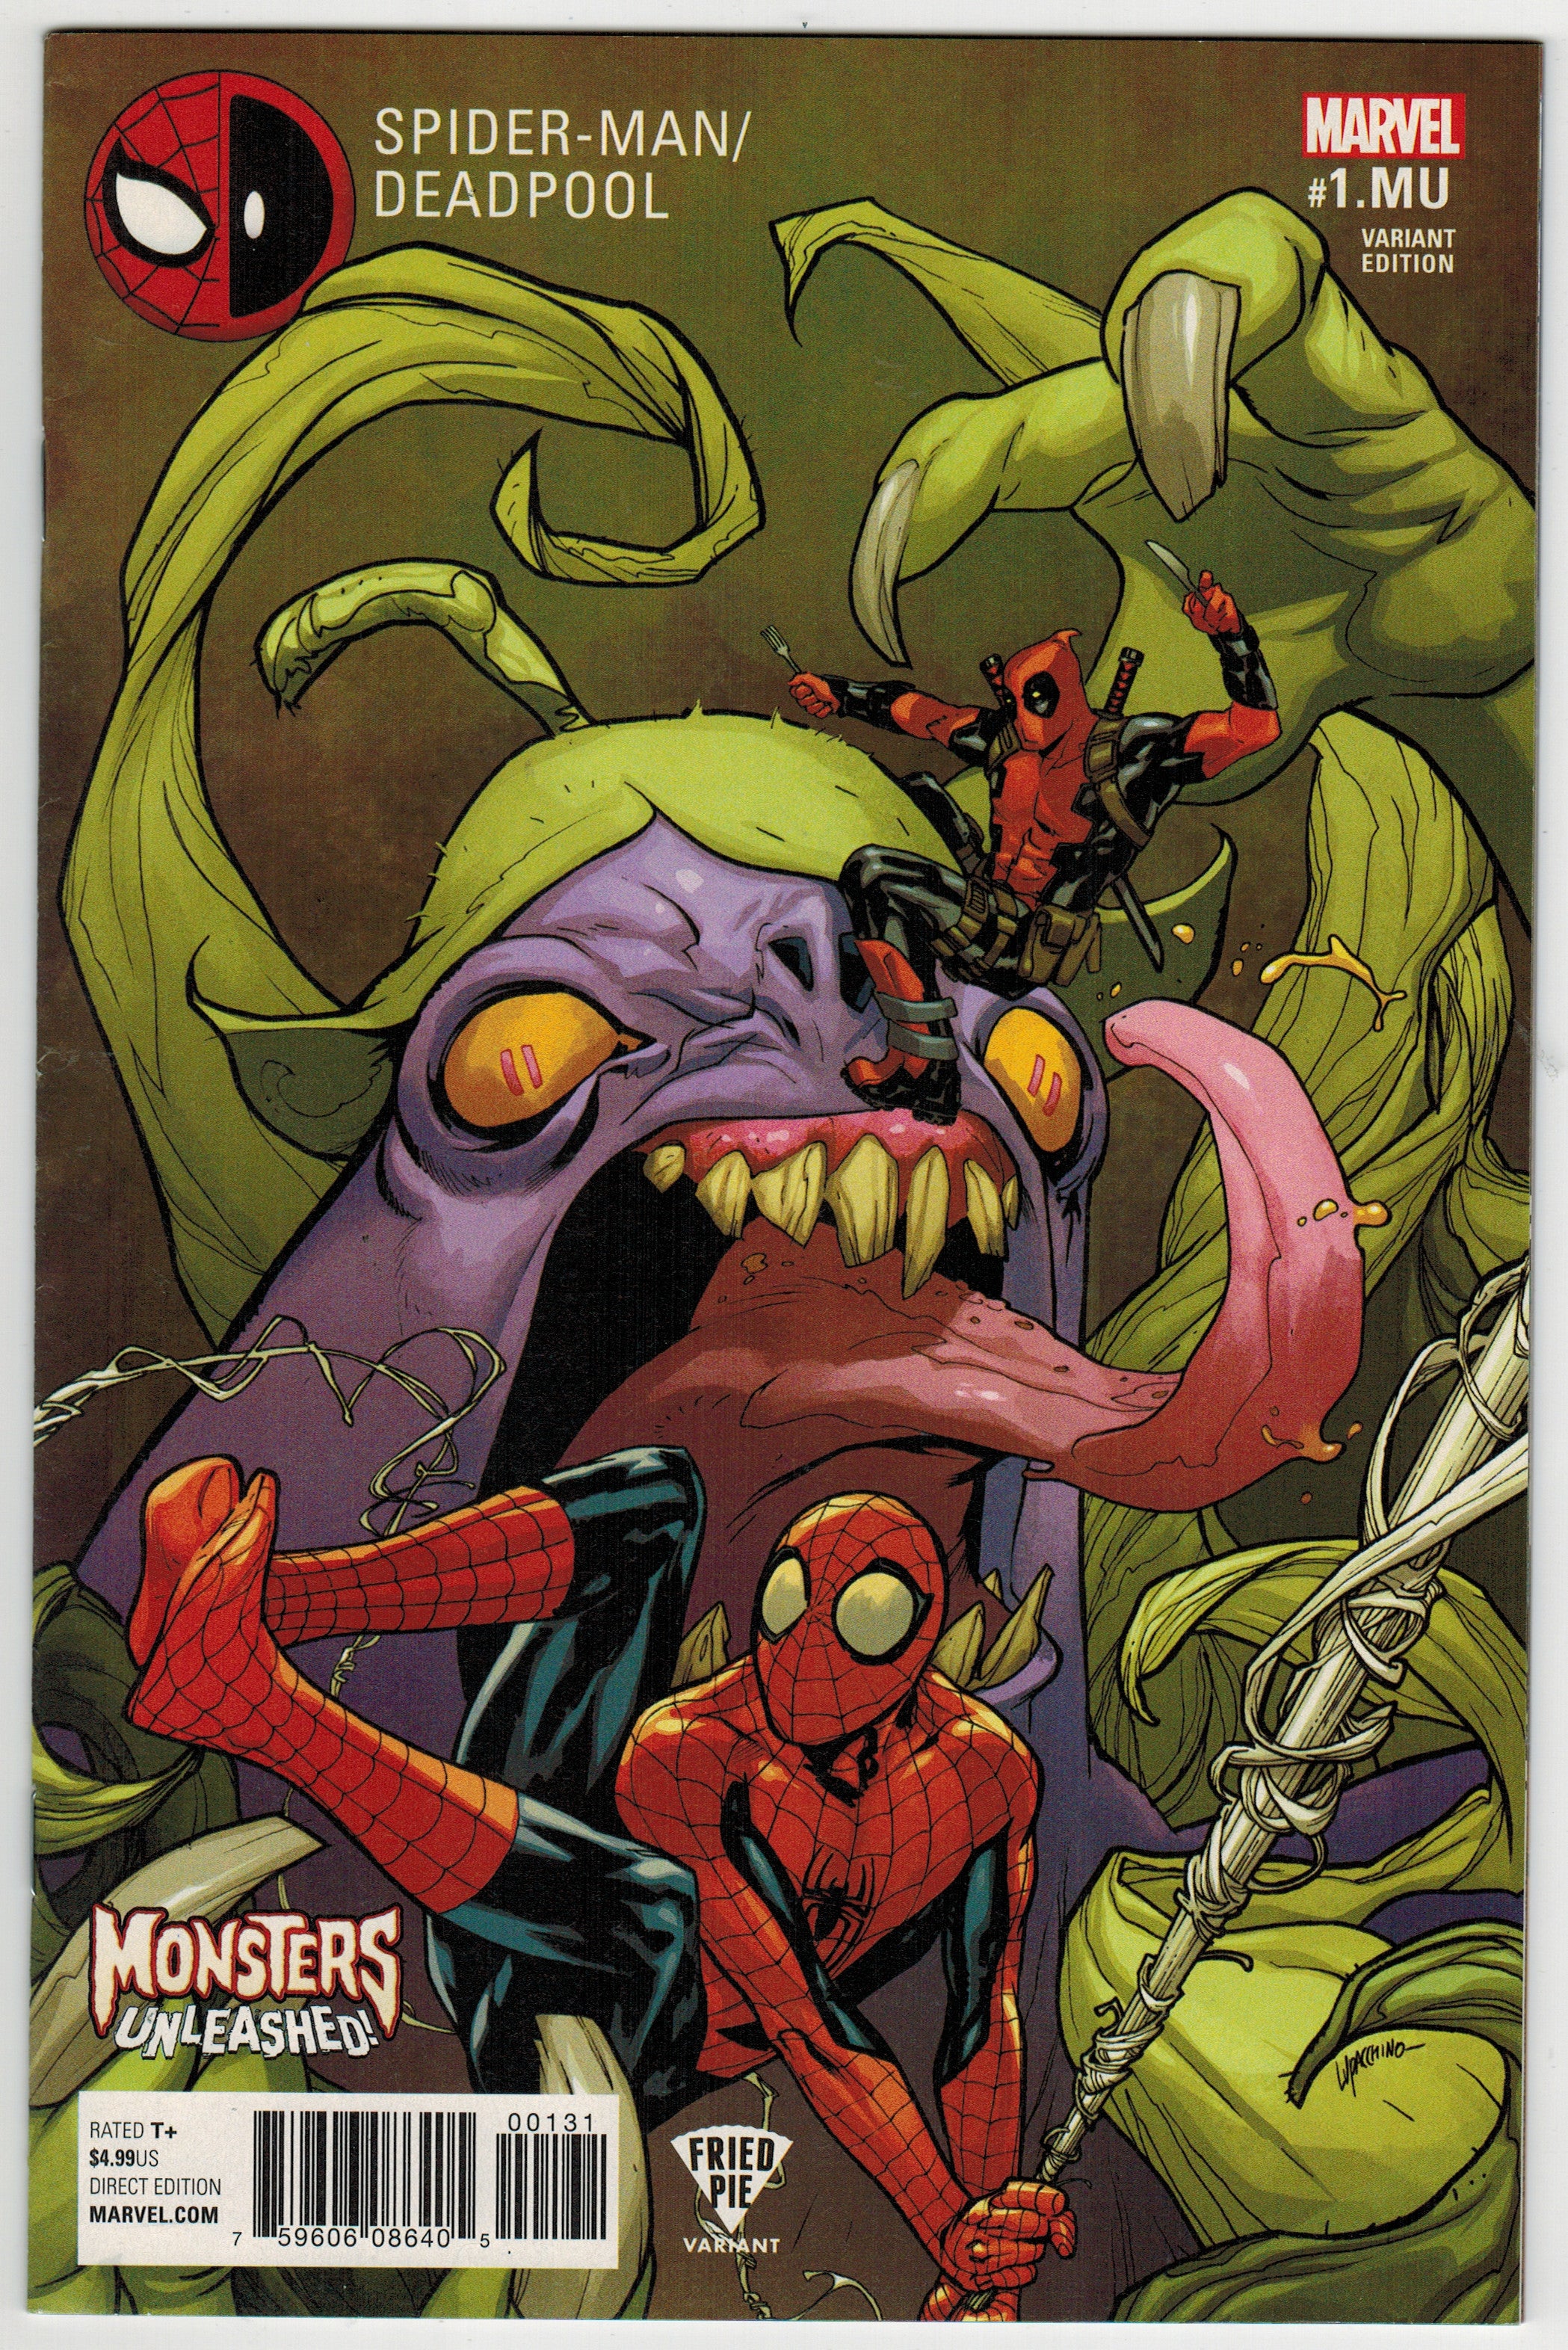 Photo of Spider-Man / Deadpool, Vol. 1 (2017) Issue 1.MU-D - Near Mint Comic sold by Stronghold Collectibles